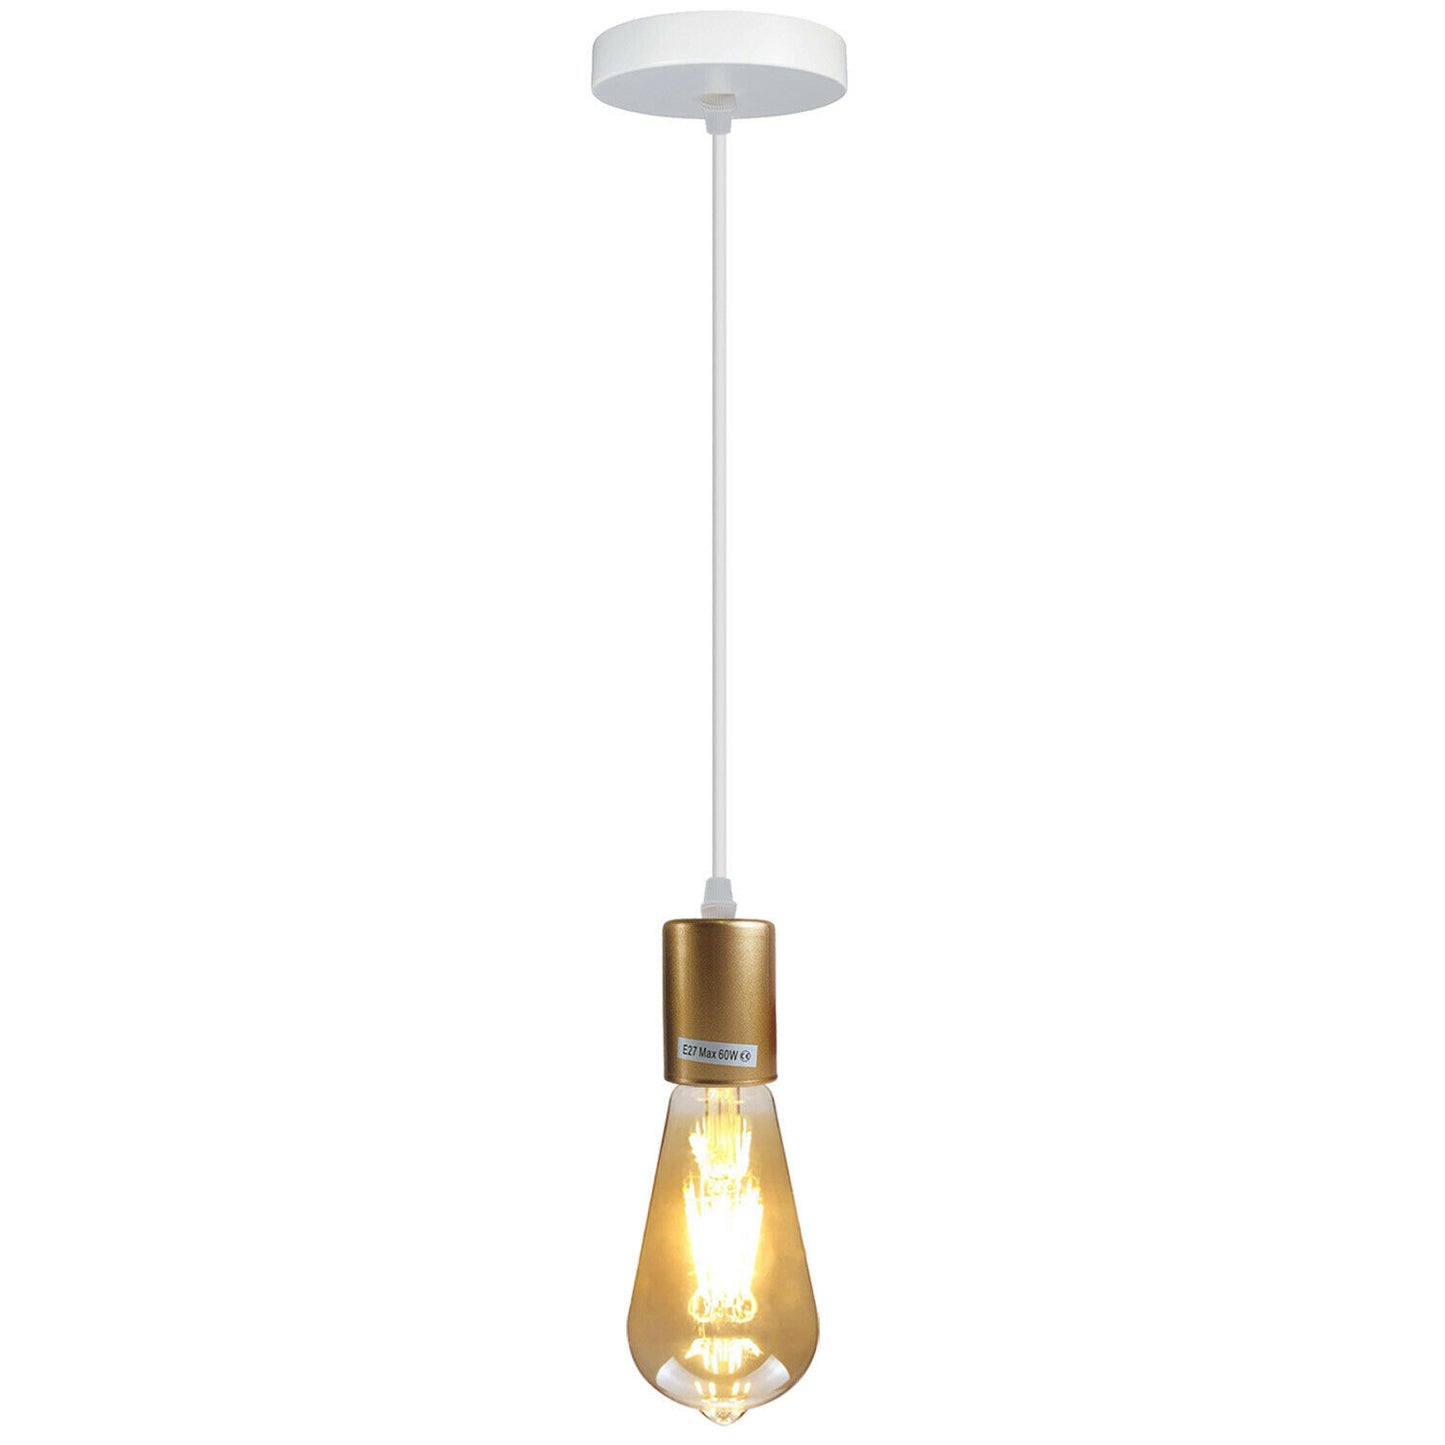 Gold Industrial Metal Ceiling Fitting E27 Pendant Lamp Holders